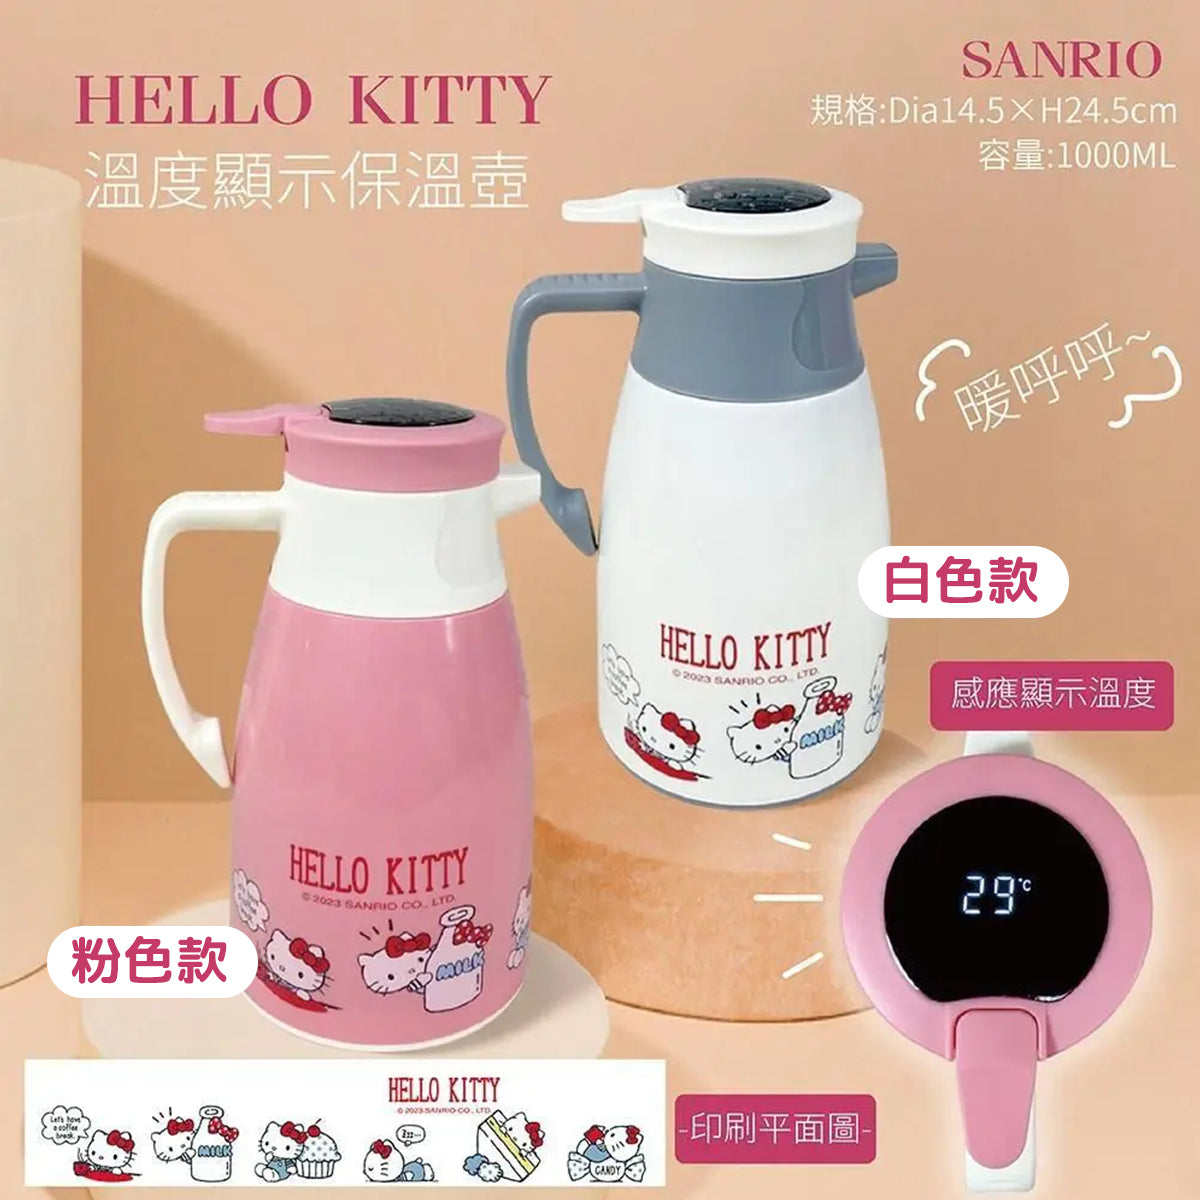 Thermo Kettle - Hello Kitty White 1L (TW Edition)